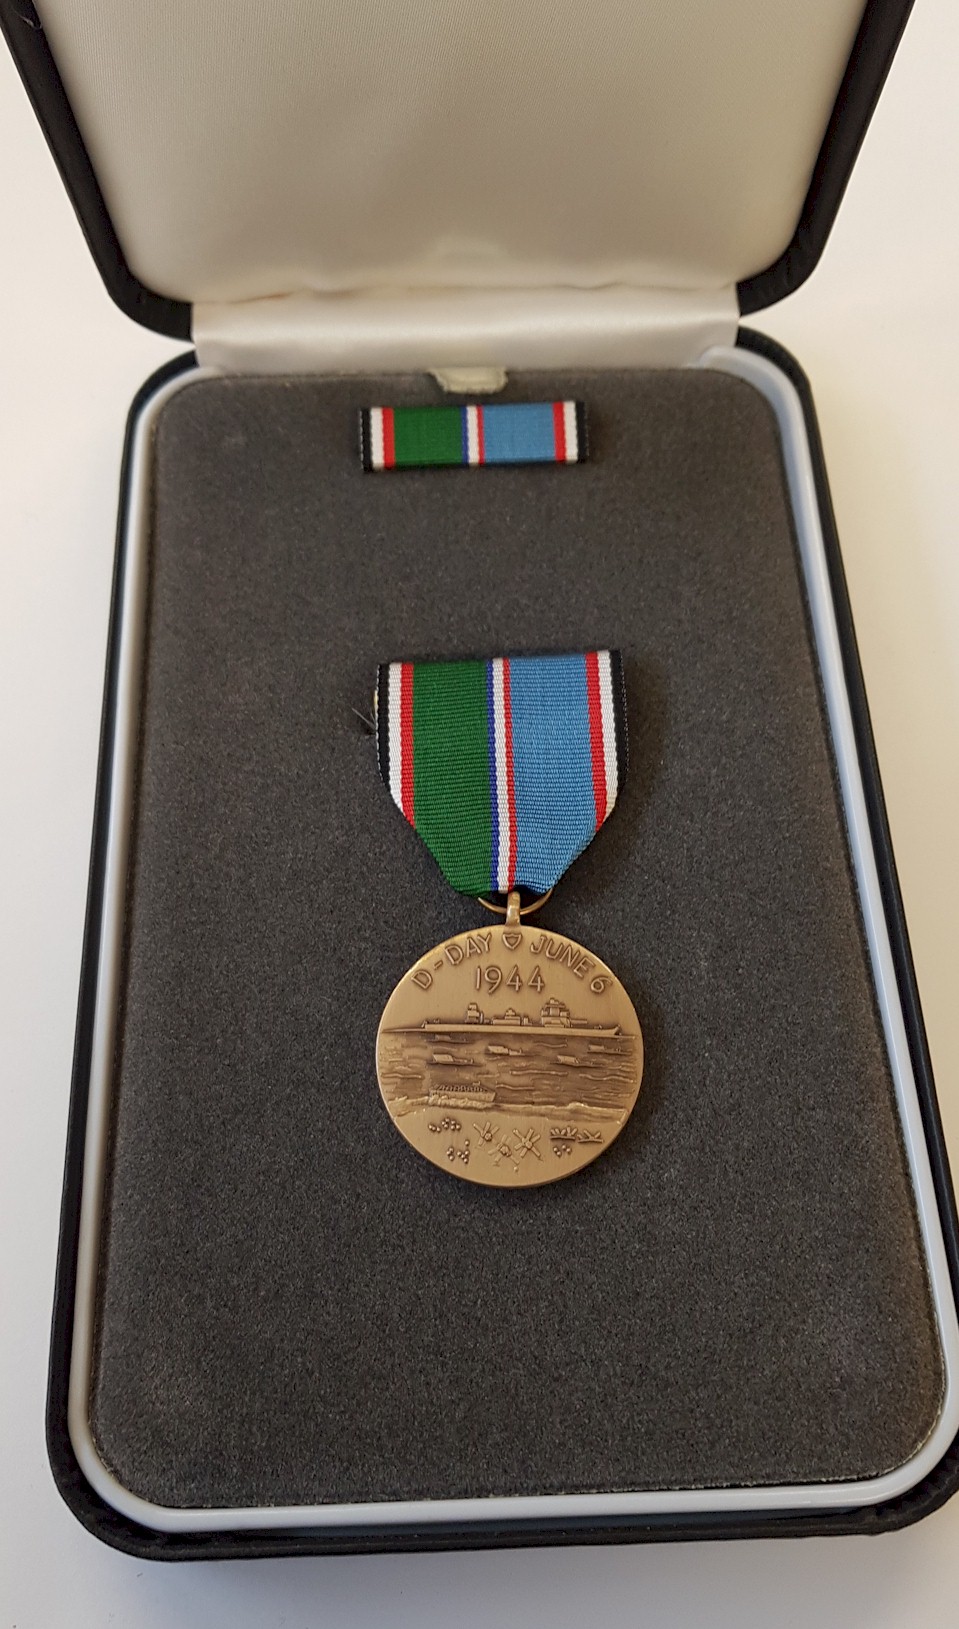 AMERICAN D-DAY COMMEMORATIVE MEDAL WITH PRESENTATION CASE